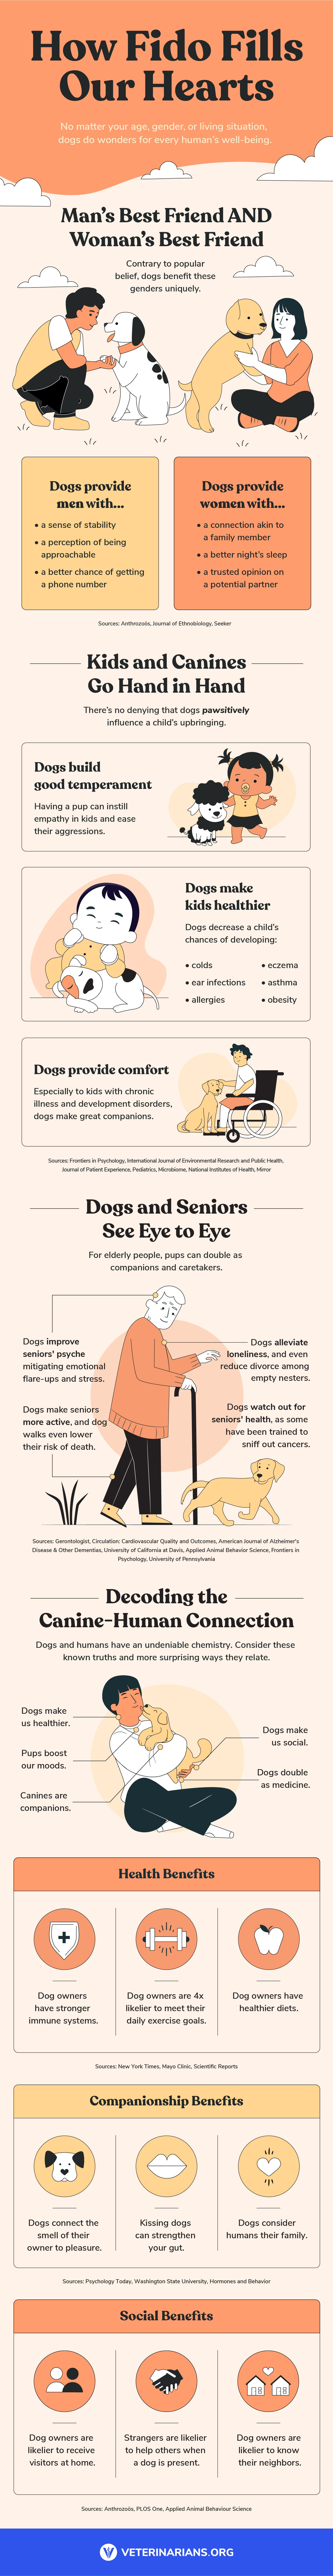 Benefits of Having a Dog Infographic